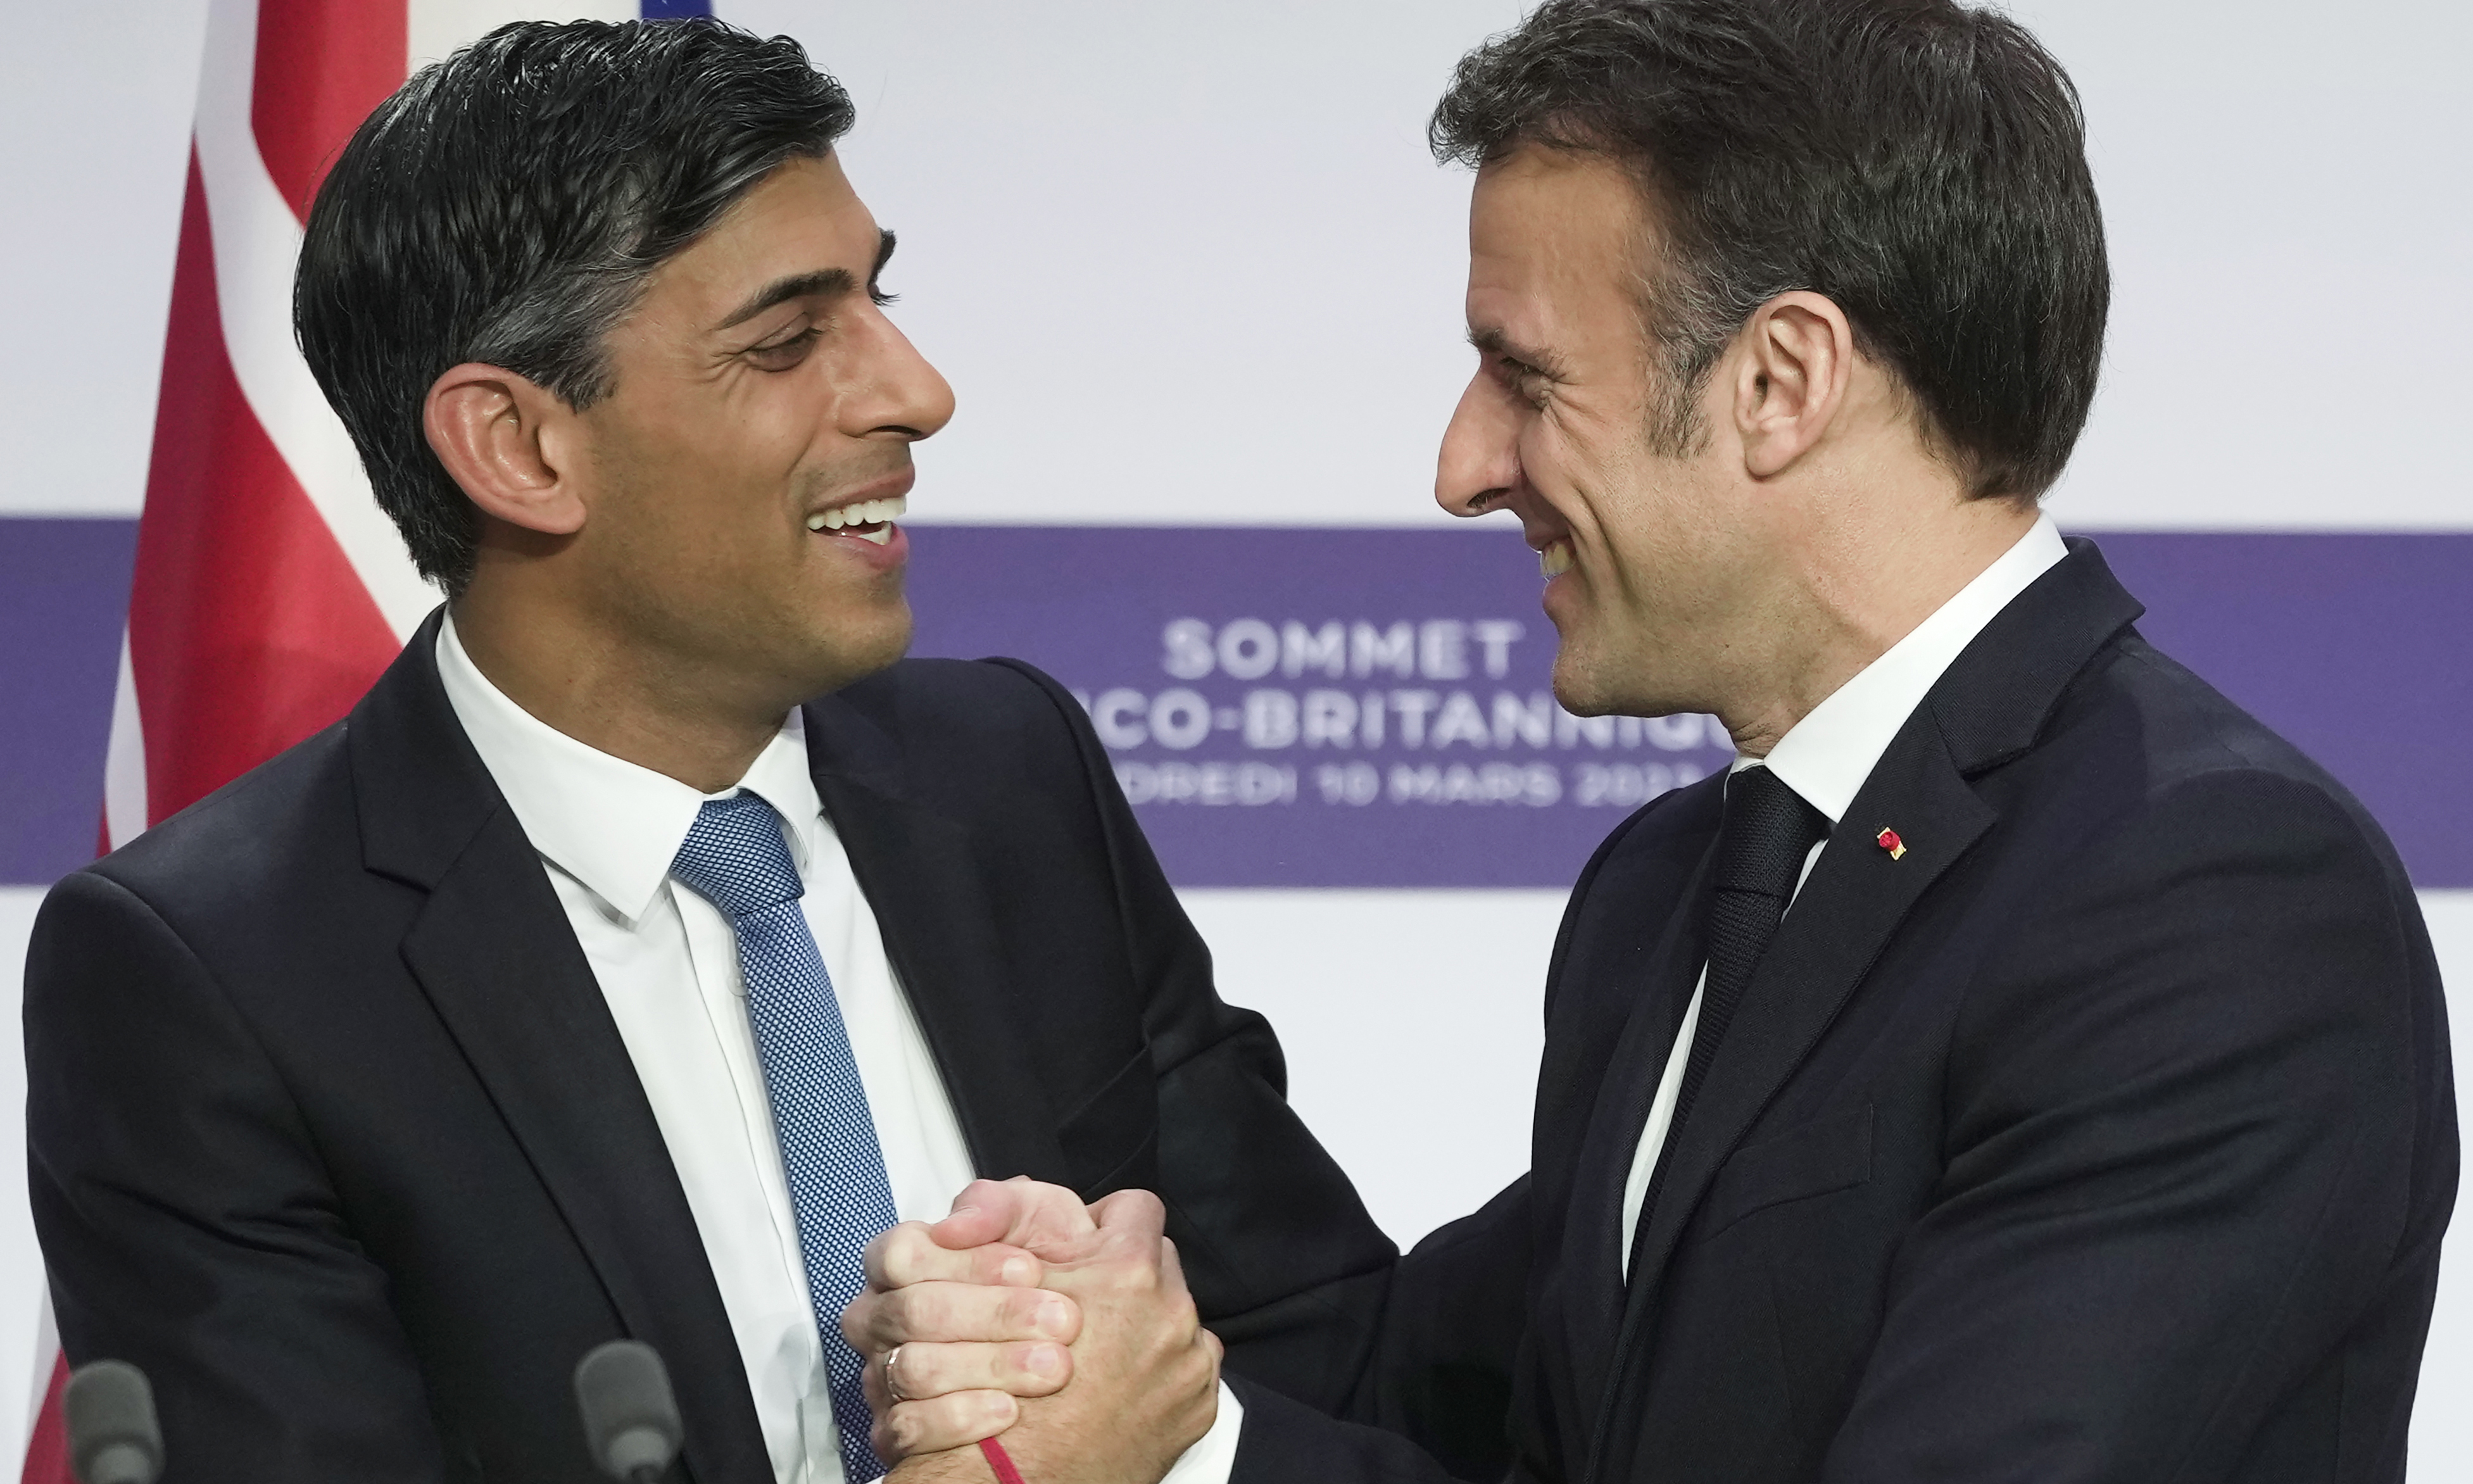 PARIS: Britain's Prime Minister Rishi Sunak (L) and France's President Emmanuel Macron (R) shake hands during a joint press conference at the end of the French-British summit. - AFP